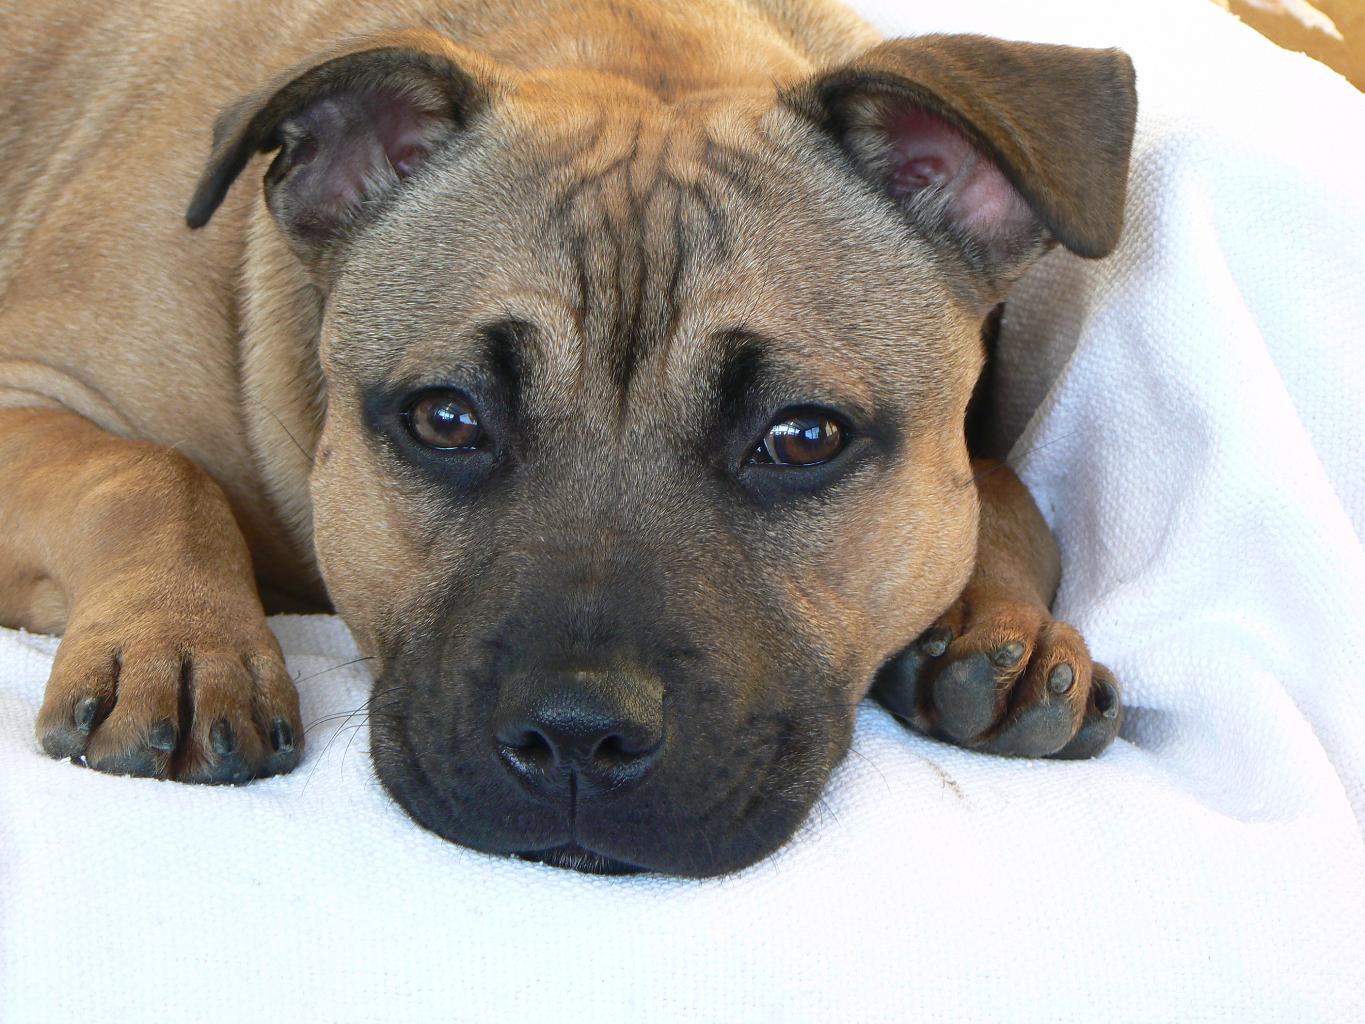 Resting Staffordshire Bull Terrier photo and wallpaper. Beautiful